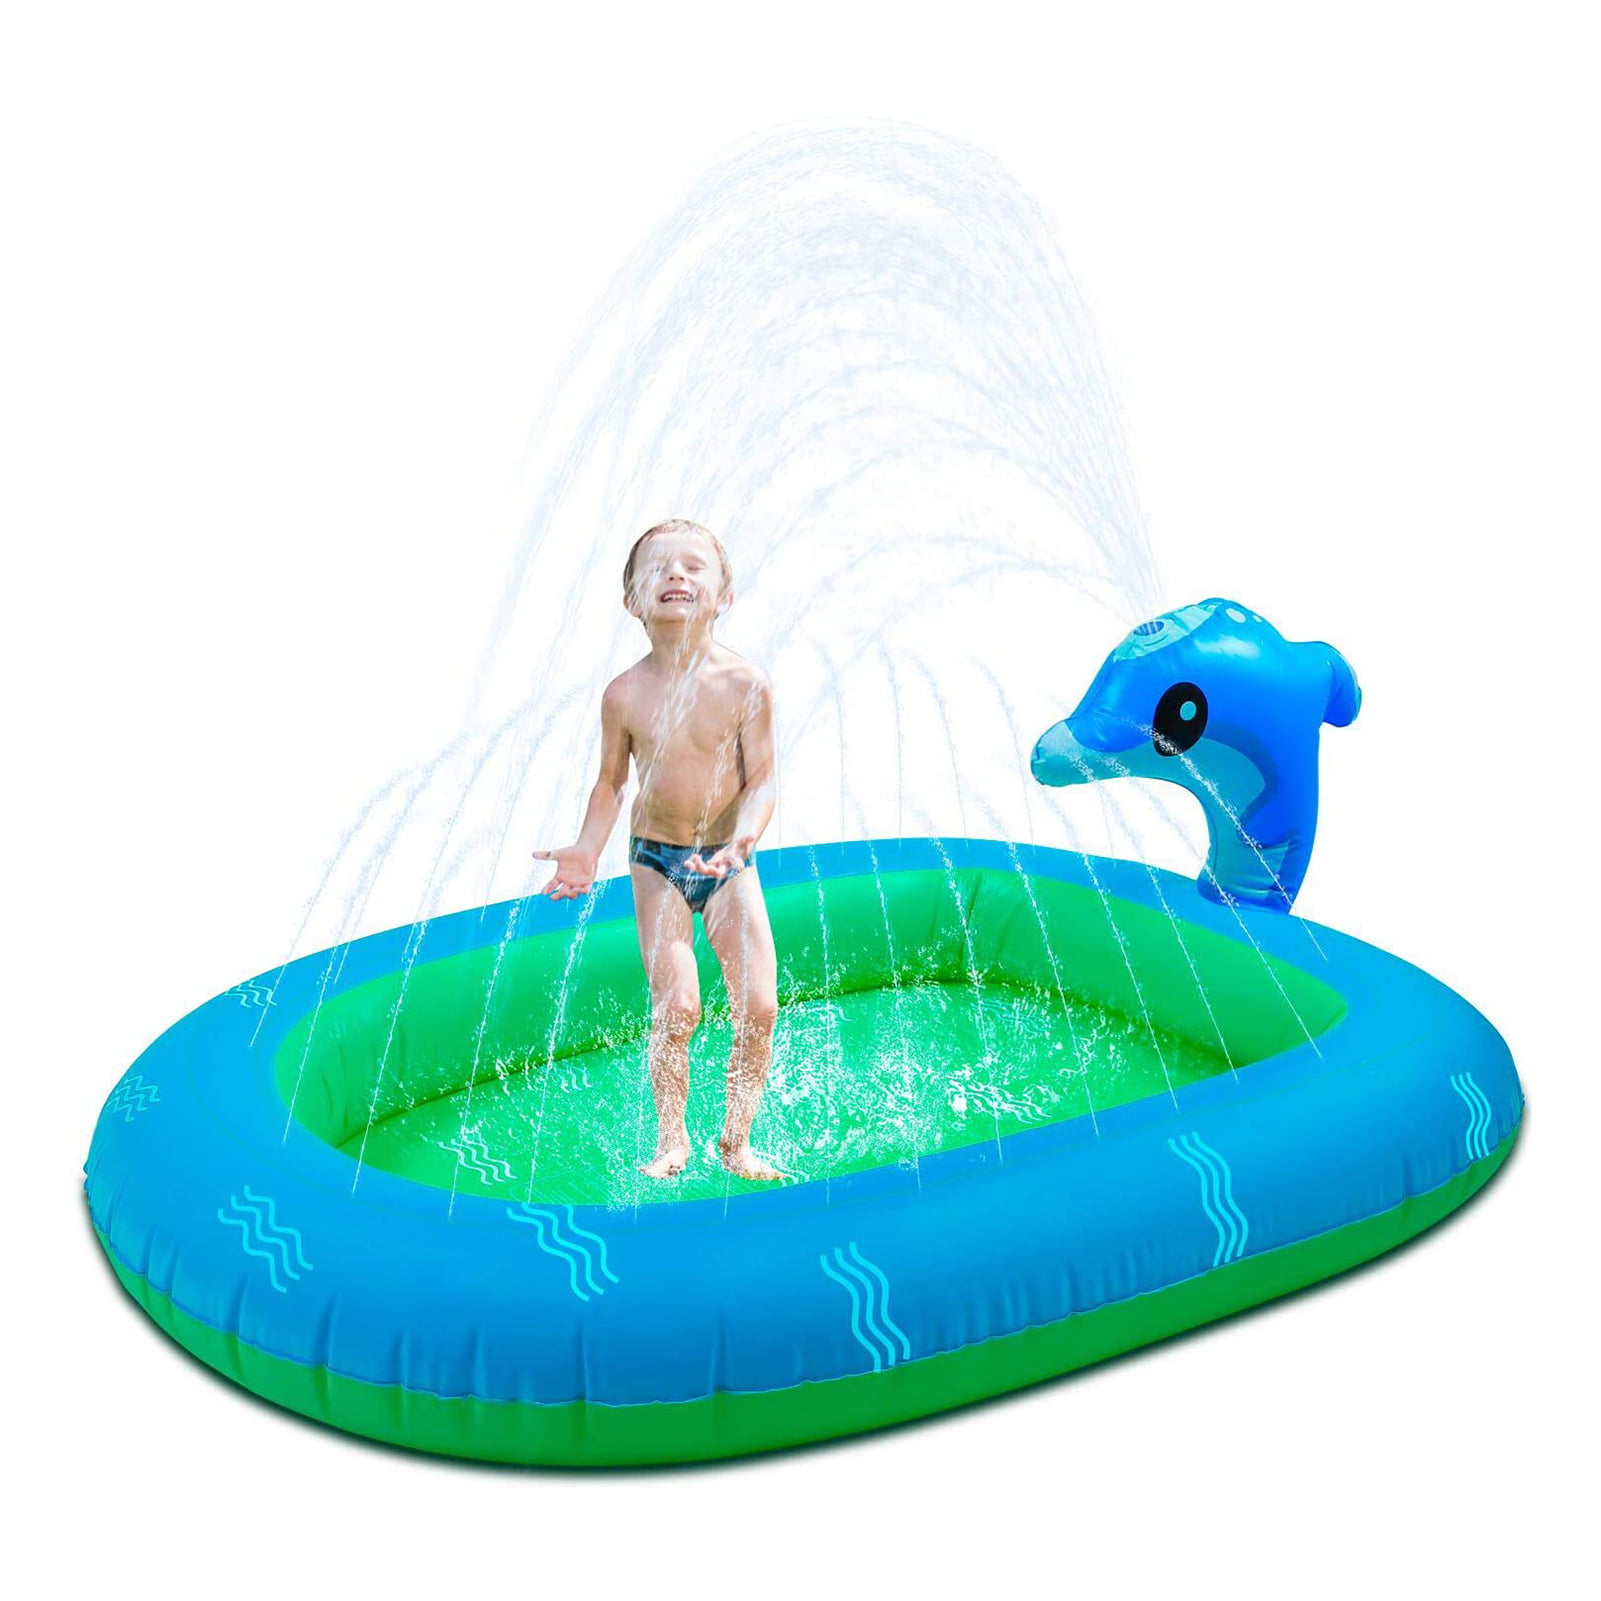 Details about   Games Center Backyard Children Adult Toys Inflatable Water Slide Pools Children 